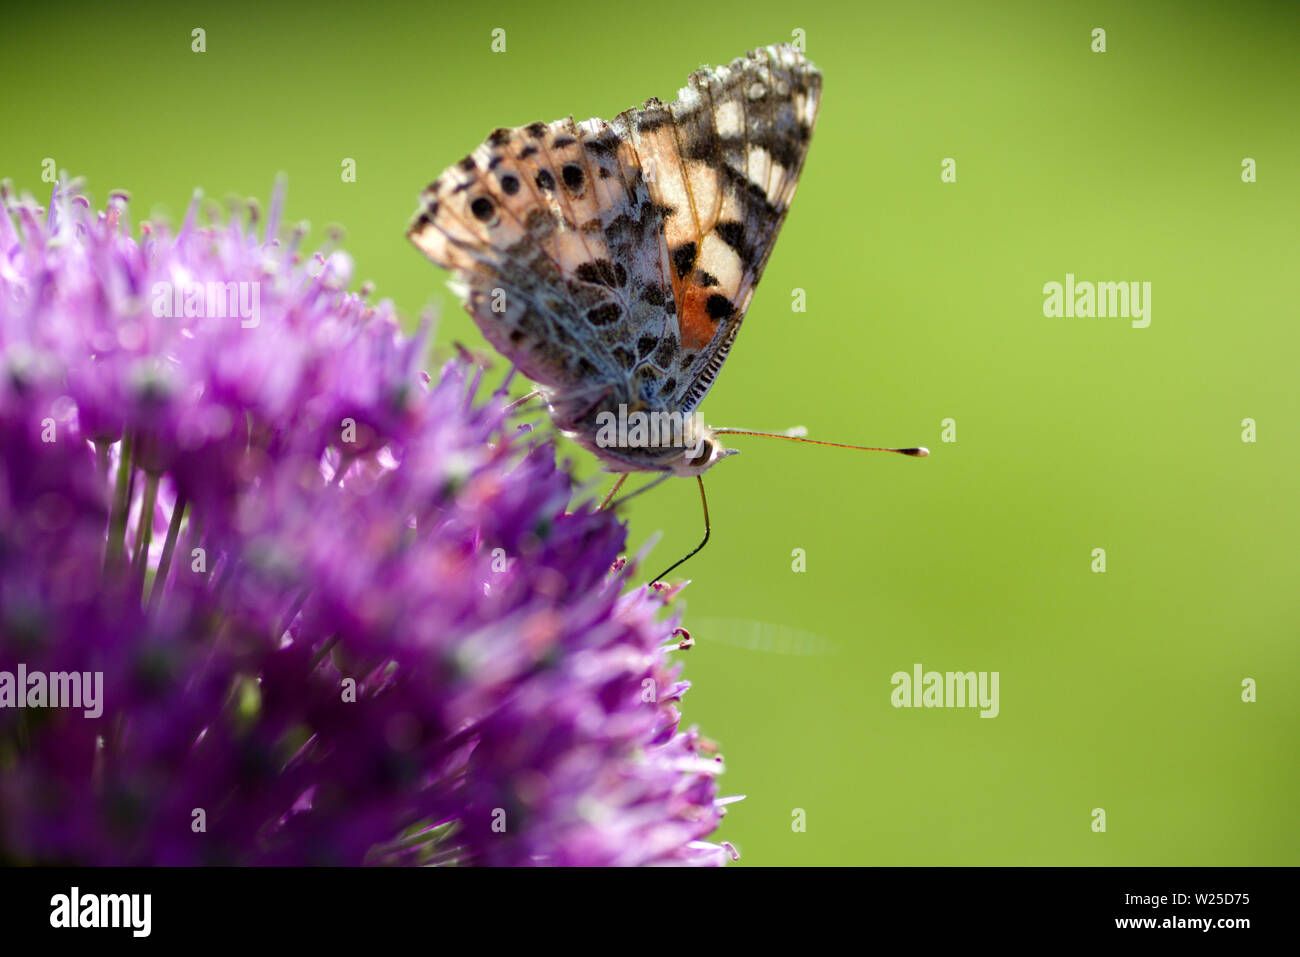 Butterfly, Vanessa cardui or painted lady feeding on an Allium flower on green backround Stock Photo